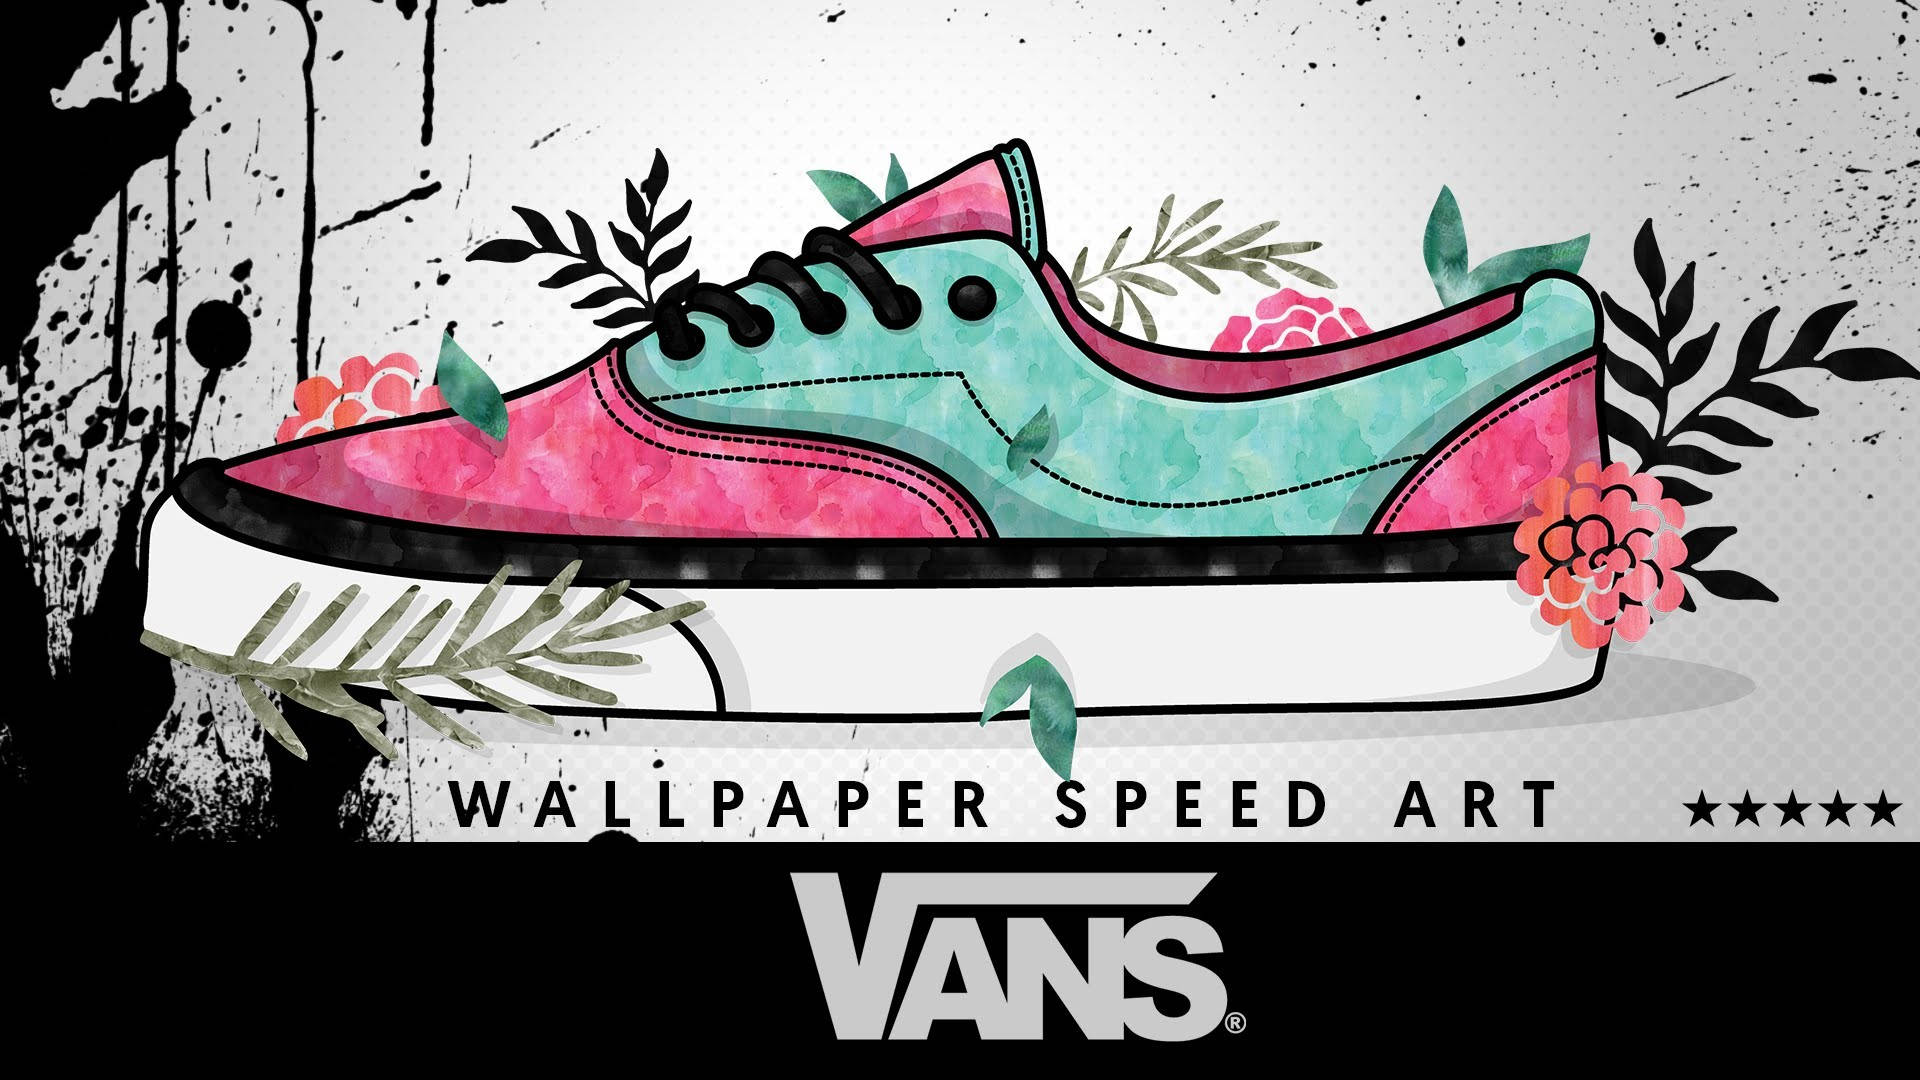 Vans Off The Wall Speed Art Background